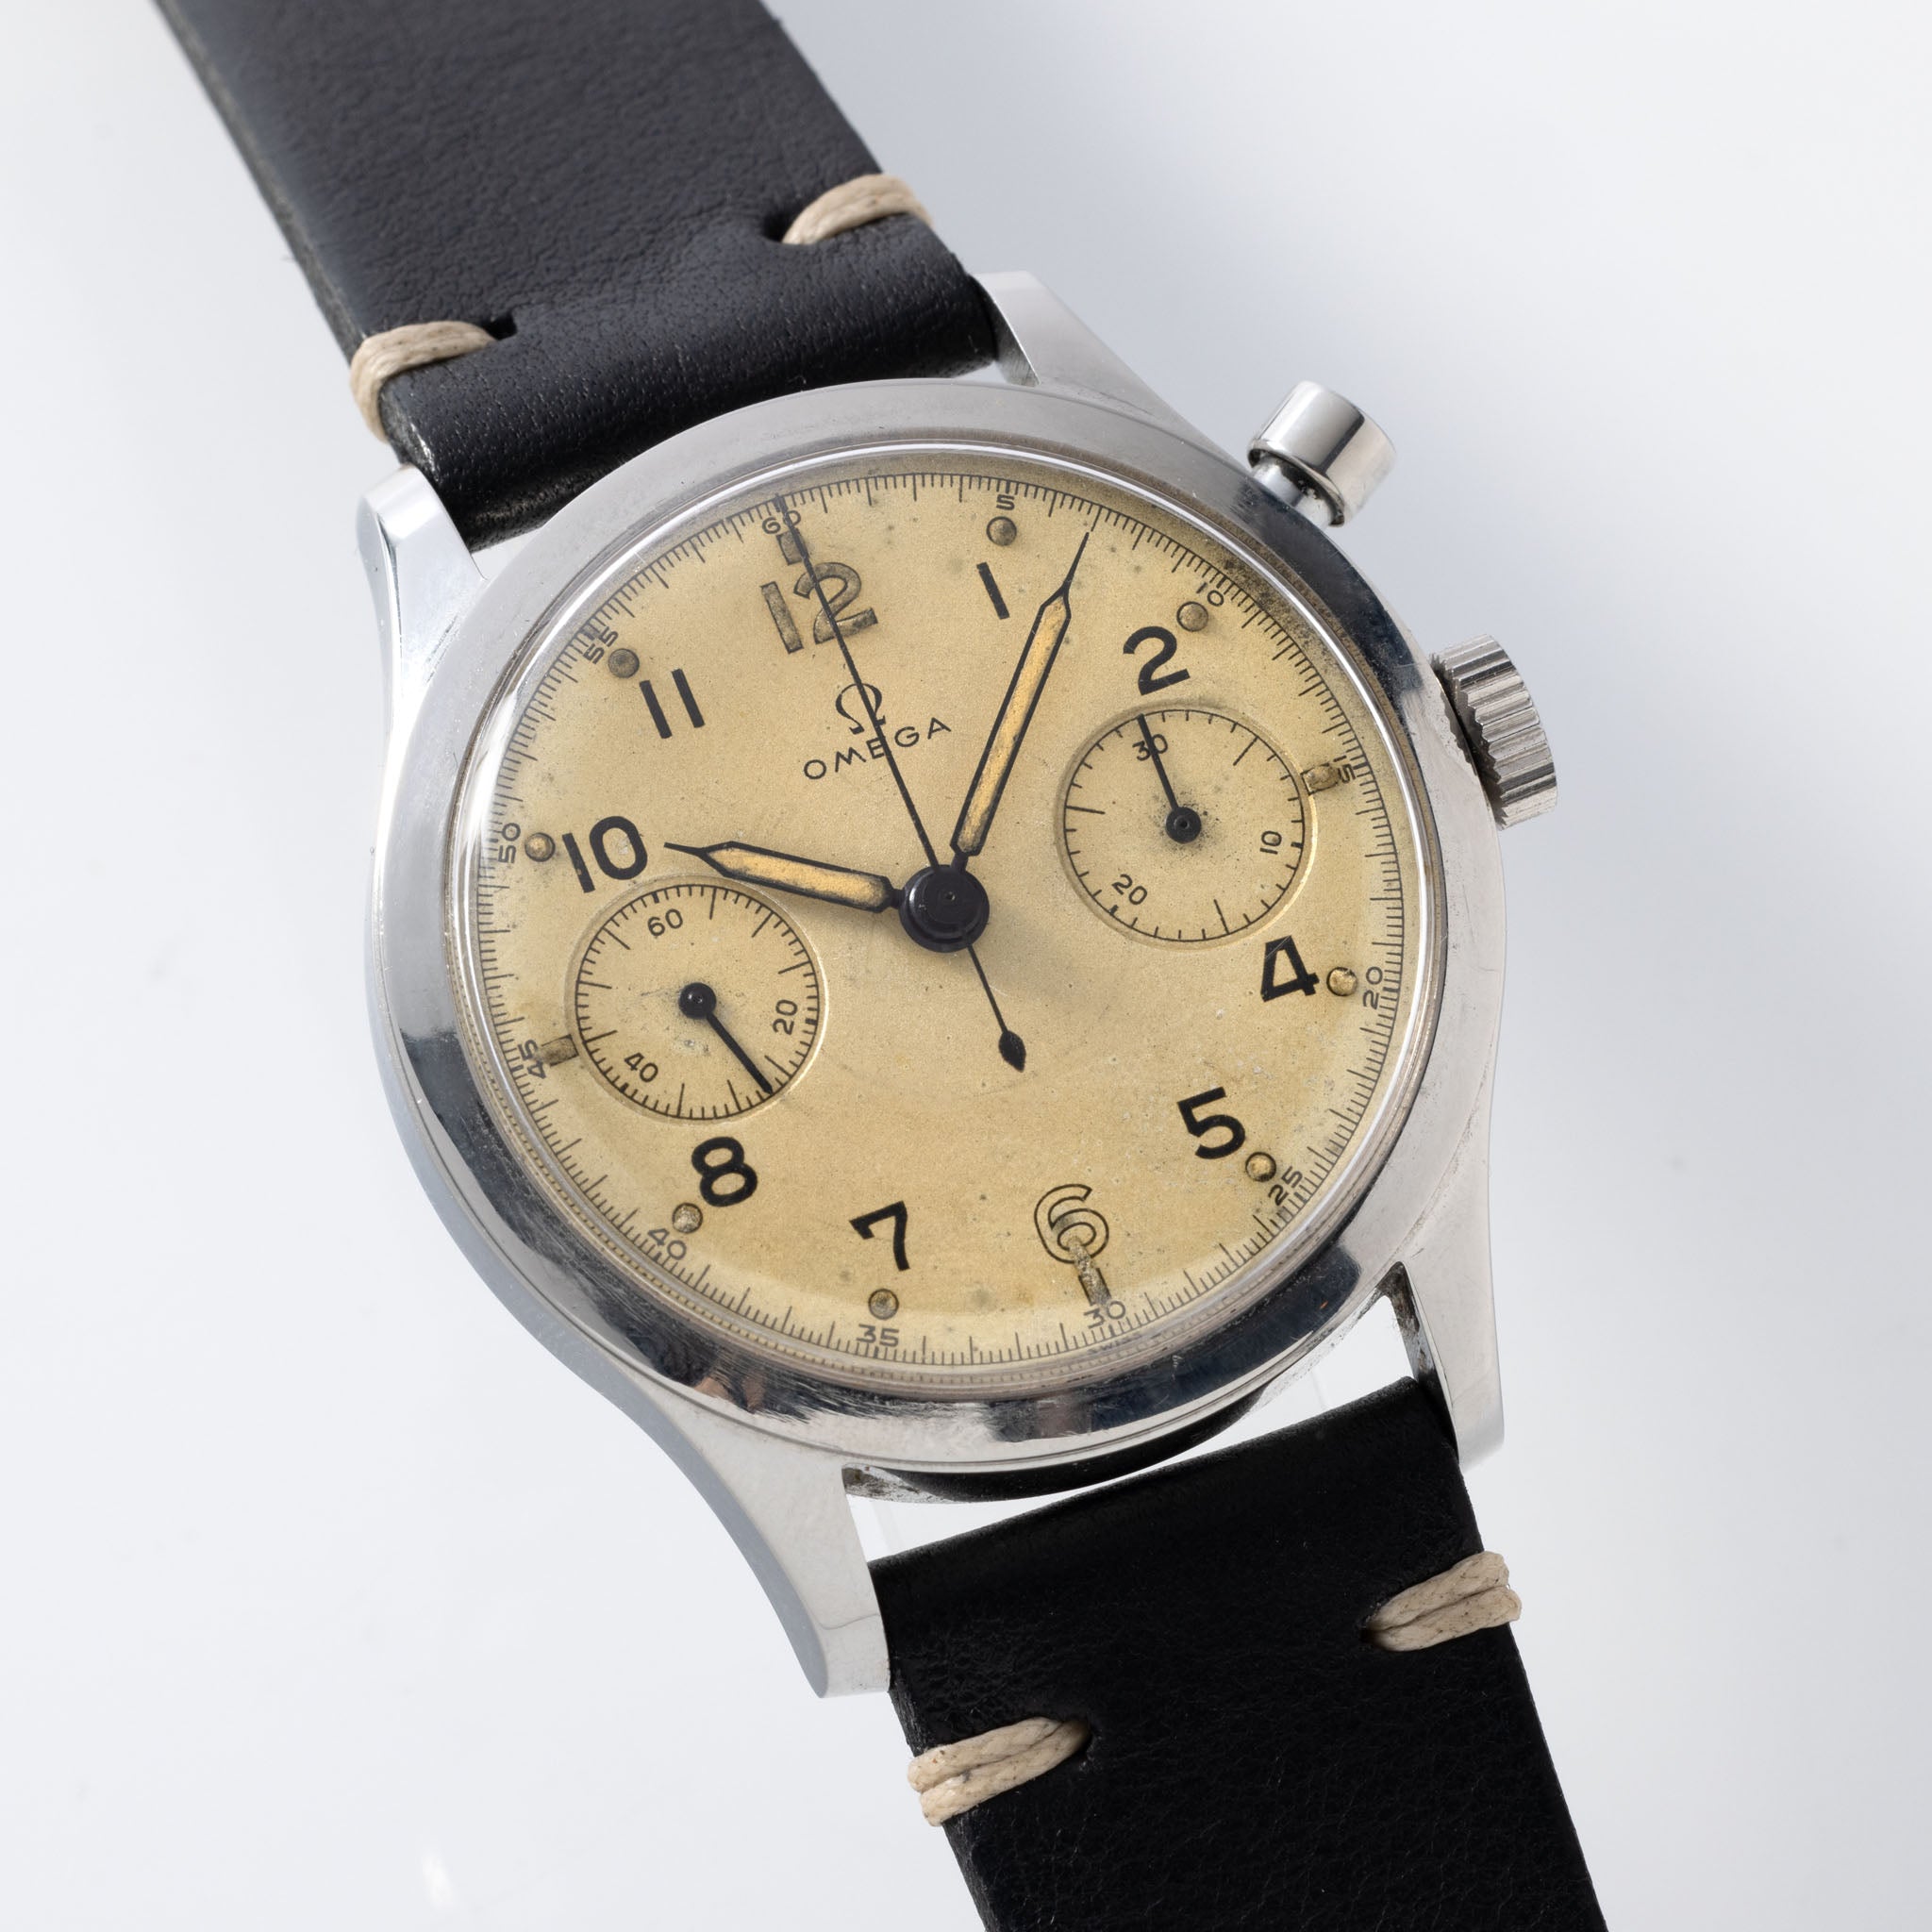 Omega RCAF Monopusher ref 6W/16 Chronograph issued to the Canadian Airforce